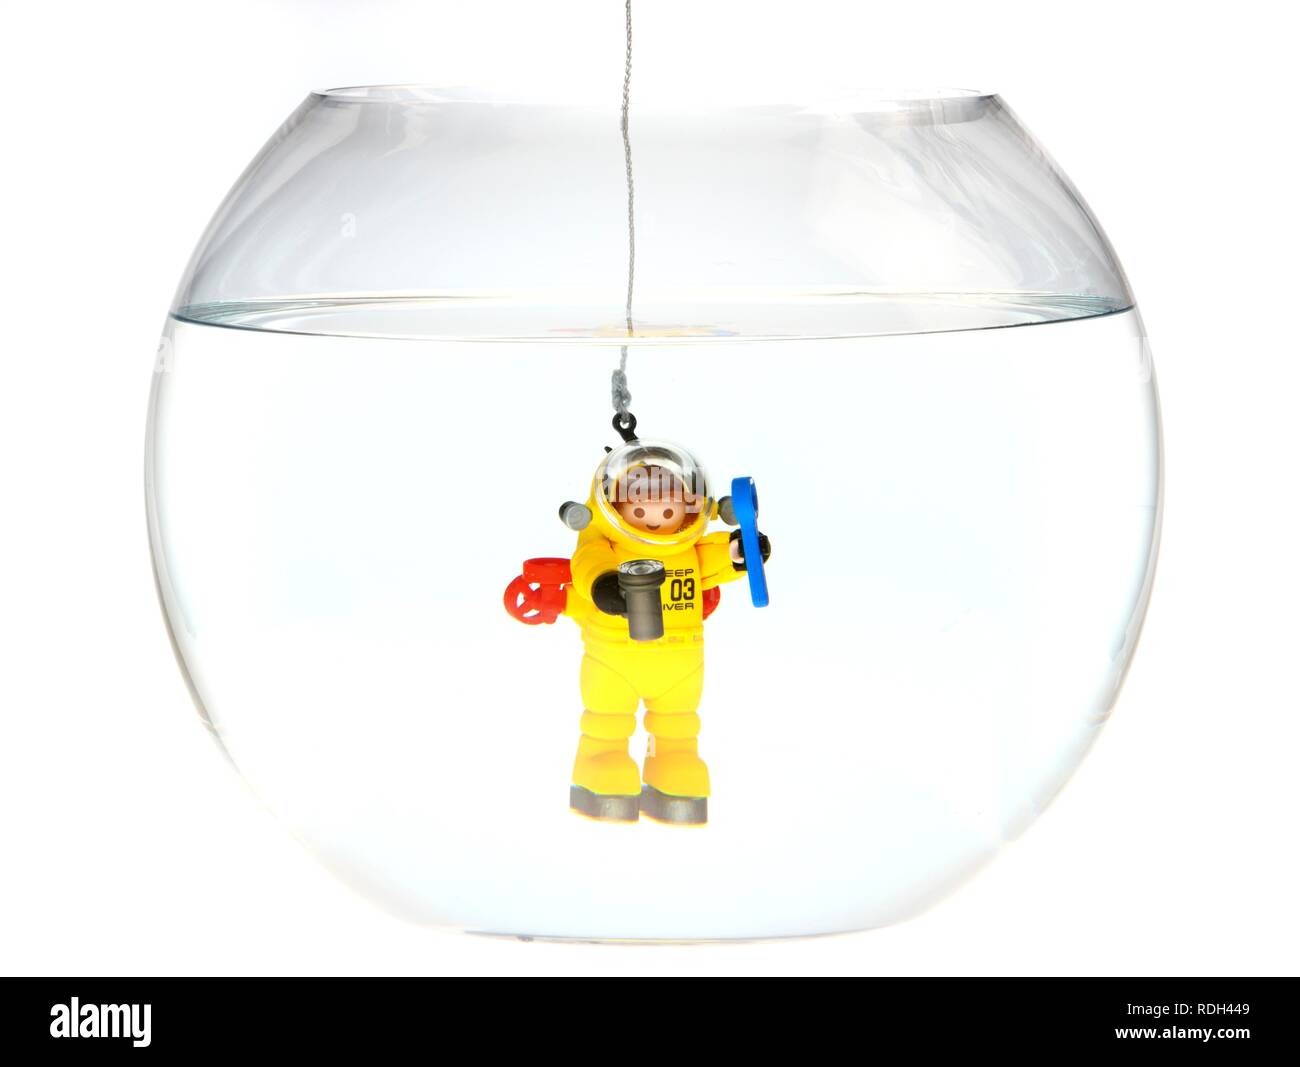 Toy deep sea diver diving in a fish bowl, illustration Stock Photo